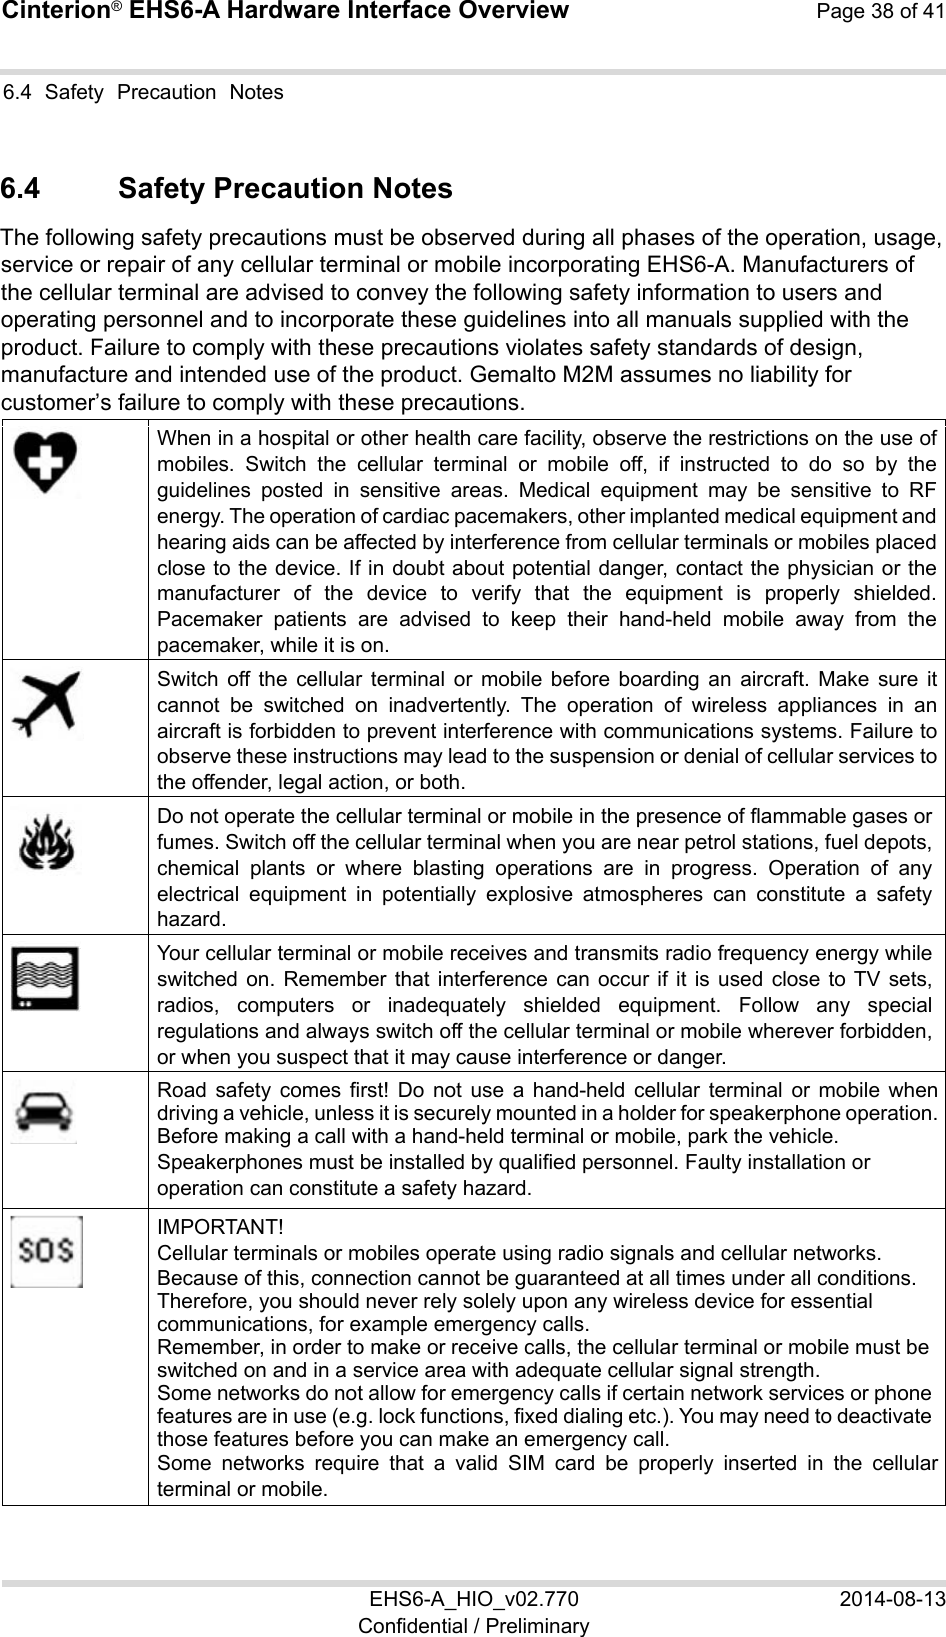 Cinterion® EHS6-A Hardware Interface Overview Page 38 of 41 EHS6-A_HIO_v02.770  2014-08-13 Confidential / Preliminary 6.4  Safety  Precaution  Notes 37 6.4  Safety Precaution Notes The following safety precautions must be observed during all phases of the operation, usage, service or repair of any cellular terminal or mobile incorporating EHS6-A. Manufacturers of the cellular terminal are advised to convey the following safety information to users and operating personnel and to incorporate these guidelines into all manuals supplied with the product. Failure to comply with these precautions violates safety standards of design, manufacture and intended use of the product. Gemalto M2M assumes no liability for customer’s failure to comply with these precautions.  When in a hospital or other health care facility, observe the restrictions on the use of mobiles.  Switch  the  cellular  terminal  or  mobile  off,  if  instructed  to  do  so  by  the guidelines  posted  in  sensitive  areas.  Medical  equipment  may  be  sensitive  to  RF energy. The operation of cardiac pacemakers, other implanted medical equipment and hearing aids can be affected by interference from cellular terminals or mobiles placed close to the device. If in doubt about potential danger, contact the physician or the manufacturer  of  the  device  to  verify  that  the  equipment  is  properly  shielded. Pacemaker  patients  are  advised  to  keep  their  hand-held  mobile  away  from  the pacemaker, while it is on.   Switch  off  the  cellular  terminal  or  mobile  before  boarding  an  aircraft.  Make  sure  it cannot  be  switched  on  inadvertently.  The  operation  of  wireless  appliances  in  an aircraft is forbidden to prevent interference with communications systems. Failure to observe these instructions may lead to the suspension or denial of cellular services to the offender, legal action, or both.  Do not operate the cellular terminal or mobile in the presence of flammable gases or fumes. Switch off the cellular terminal when you are near petrol stations, fuel depots, chemical  plants  or  where  blasting  operations  are  in  progress.  Operation  of  any electrical  equipment  in  potentially  explosive  atmospheres  can  constitute  a  safety hazard.  Your cellular terminal or mobile receives and transmits radio frequency energy while switched on. Remember that interference can  occur  if  it  is  used close to TV sets, radios,  computers  or  inadequately  shielded  equipment.  Follow  any  special regulations and always switch off the cellular terminal or mobile wherever forbidden, or when you suspect that it may cause interference or danger.  Road  safety  comes  first!  Do  not  use  a  hand-held  cellular  terminal  or  mobile  when driving a vehicle, unless it is securely mounted in a holder for speakerphone operation. Before making a call with a hand-held terminal or mobile, park the vehicle.  Speakerphones must be installed by qualified personnel. Faulty installation or operation can constitute a safety hazard.  IMPORTANT! Cellular terminals or mobiles operate using radio signals and cellular networks.  Because of this, connection cannot be guaranteed at all times under all conditions. Therefore, you should never rely solely upon any wireless device for essential communications, for example emergency calls.  Remember, in order to make or receive calls, the cellular terminal or mobile must be switched on and in a service area with adequate cellular signal strength.  Some networks do not allow for emergency calls if certain network services or phone features are in use (e.g. lock functions, fixed dialing etc.). You may need to deactivate those features before you can make an emergency call. Some  networks  require  that  a  valid  SIM  card  be  properly  inserted  in  the  cellular terminal or mobile. 